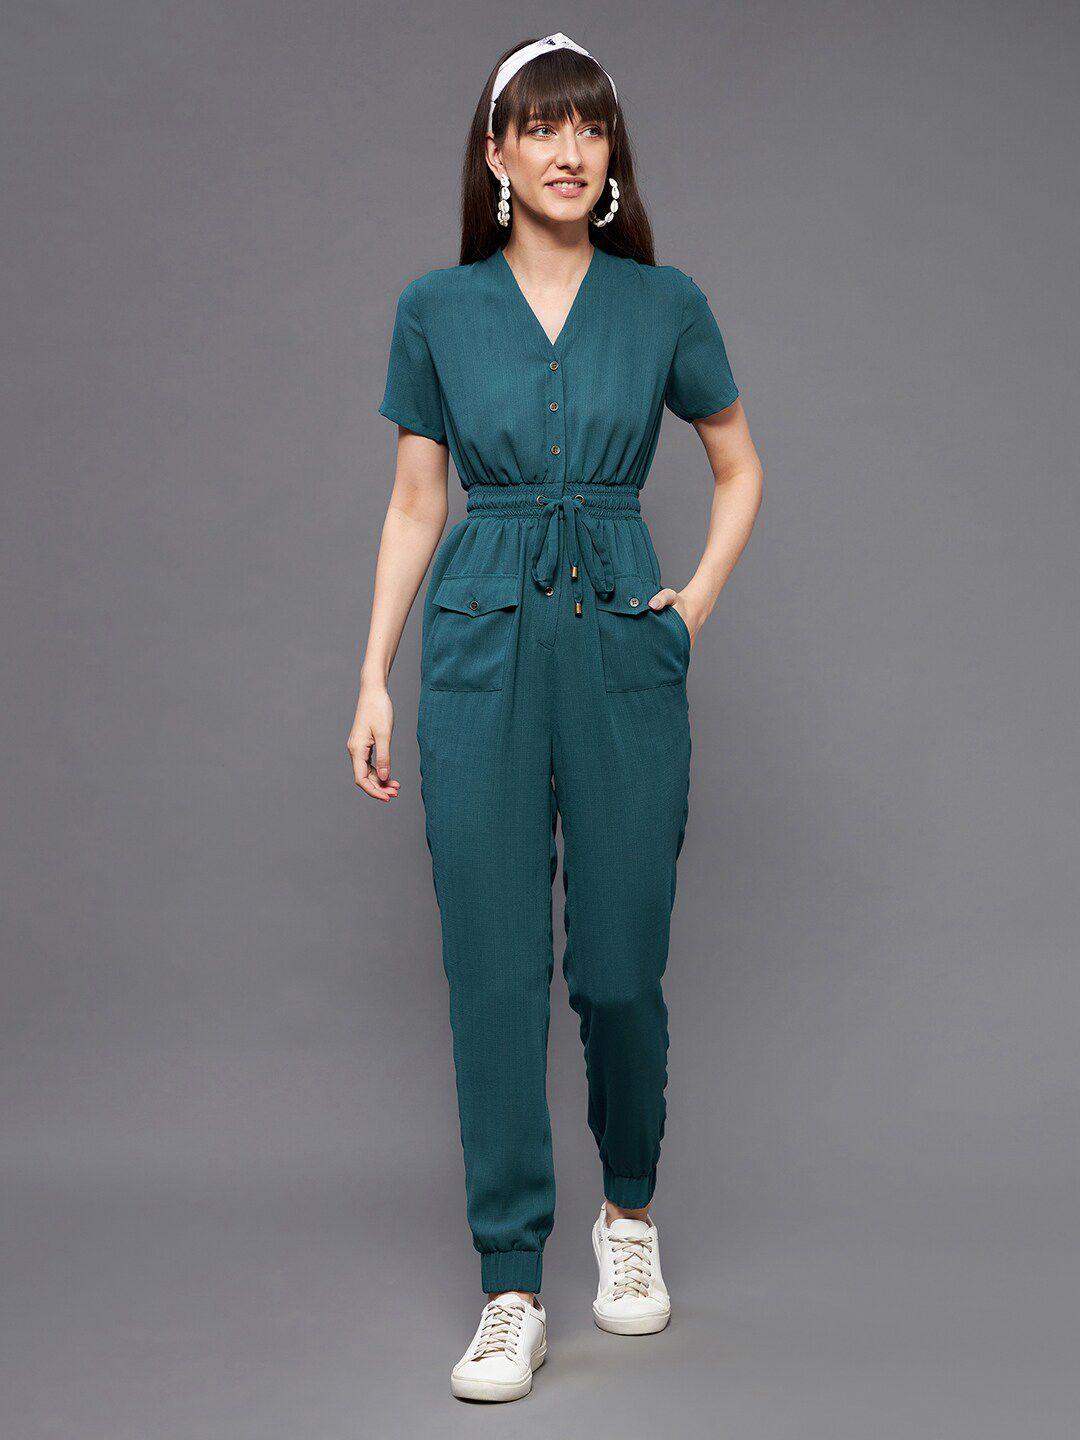 miss chase turquoise blue solid basic jumpsuit